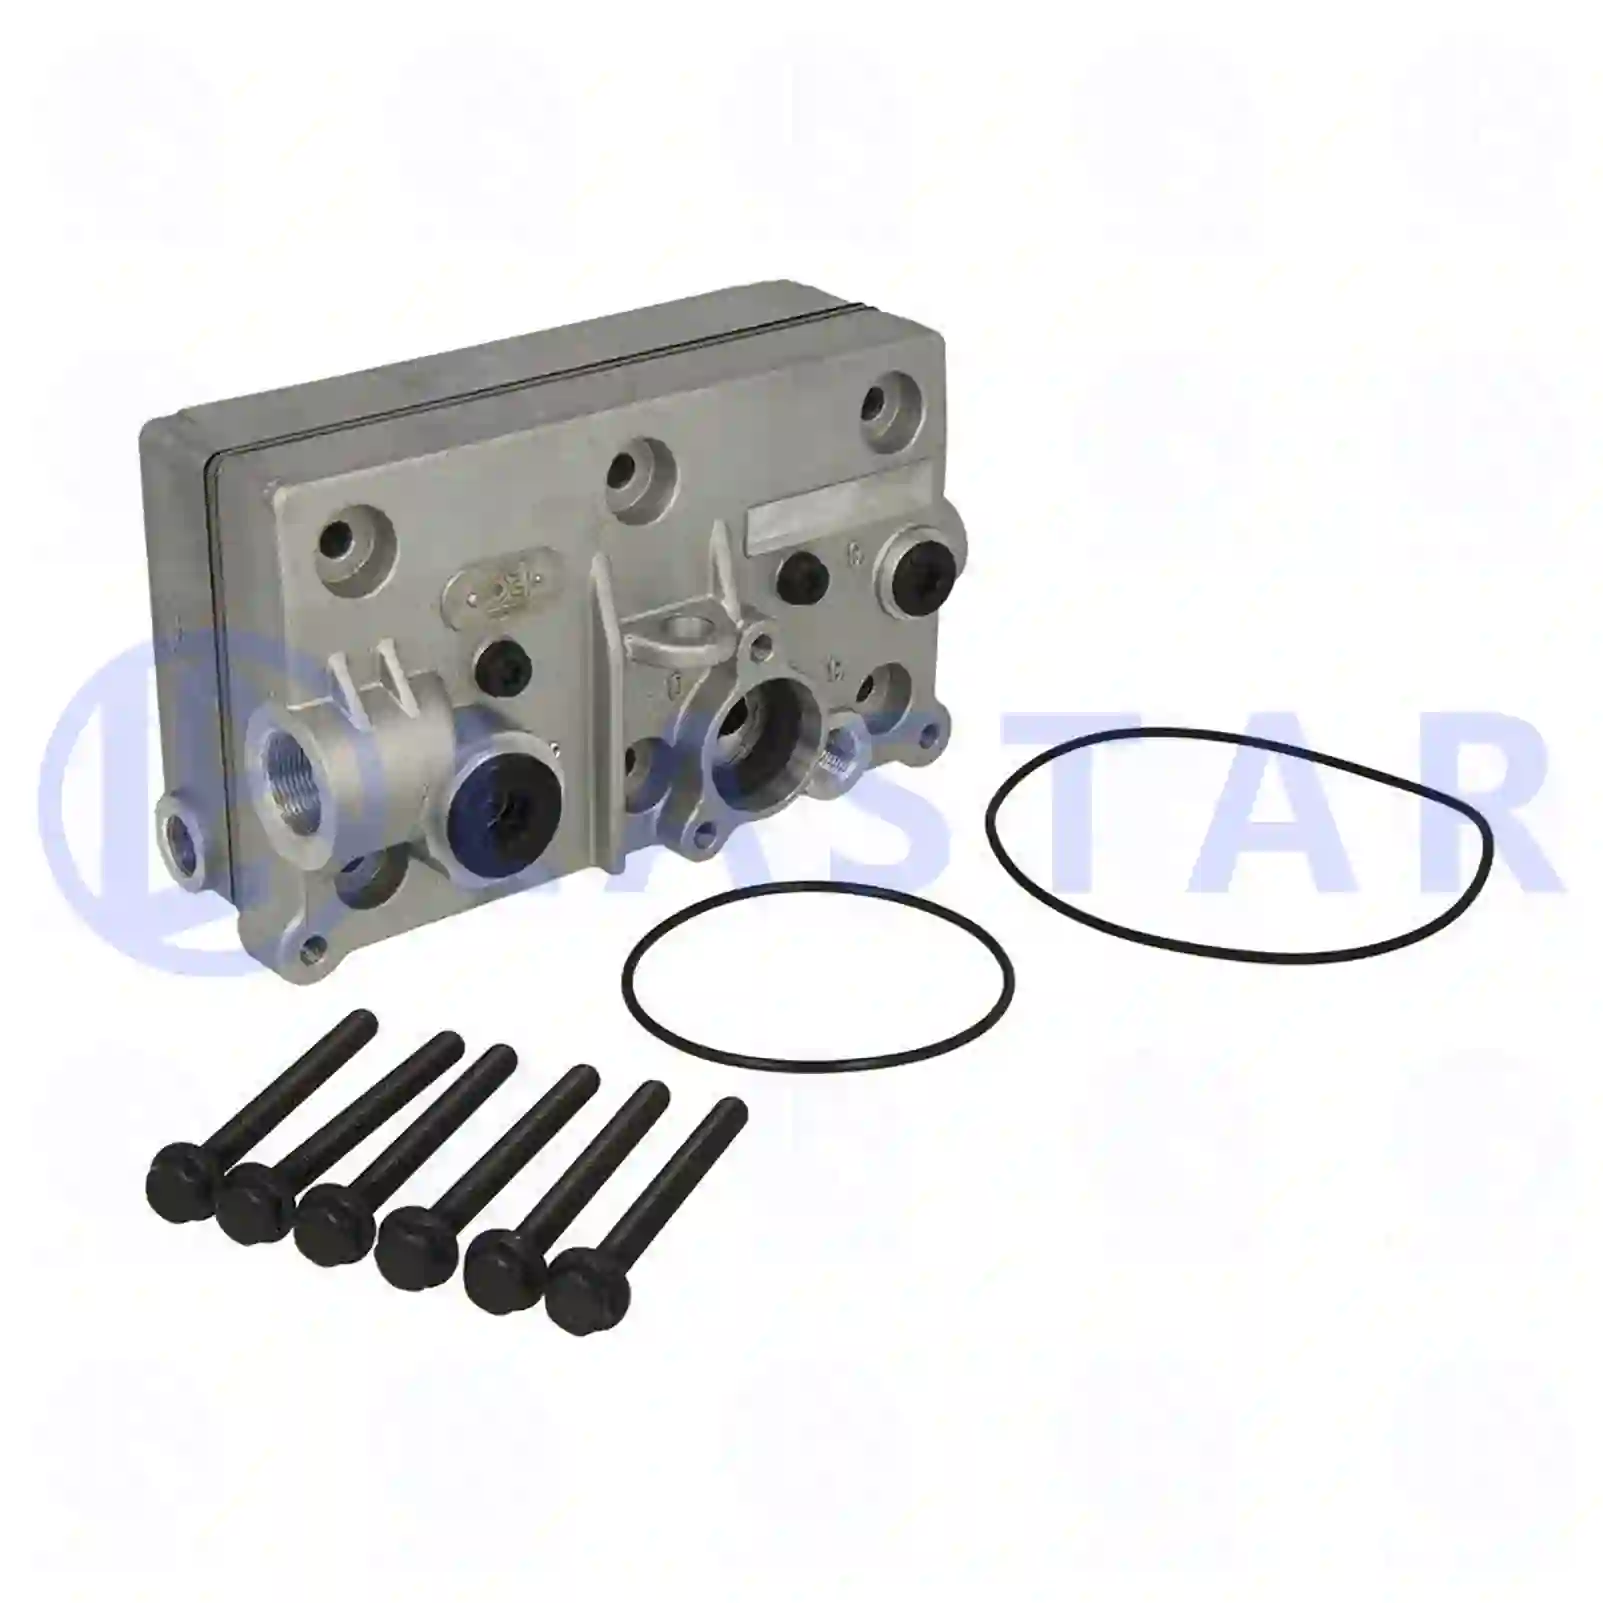 Cylinder head, compressor, complete, 77717487, 20569930, 20775147, 20845004, ZG50391-0008 ||  77717487 Lastar Spare Part | Truck Spare Parts, Auotomotive Spare Parts Cylinder head, compressor, complete, 77717487, 20569930, 20775147, 20845004, ZG50391-0008 ||  77717487 Lastar Spare Part | Truck Spare Parts, Auotomotive Spare Parts